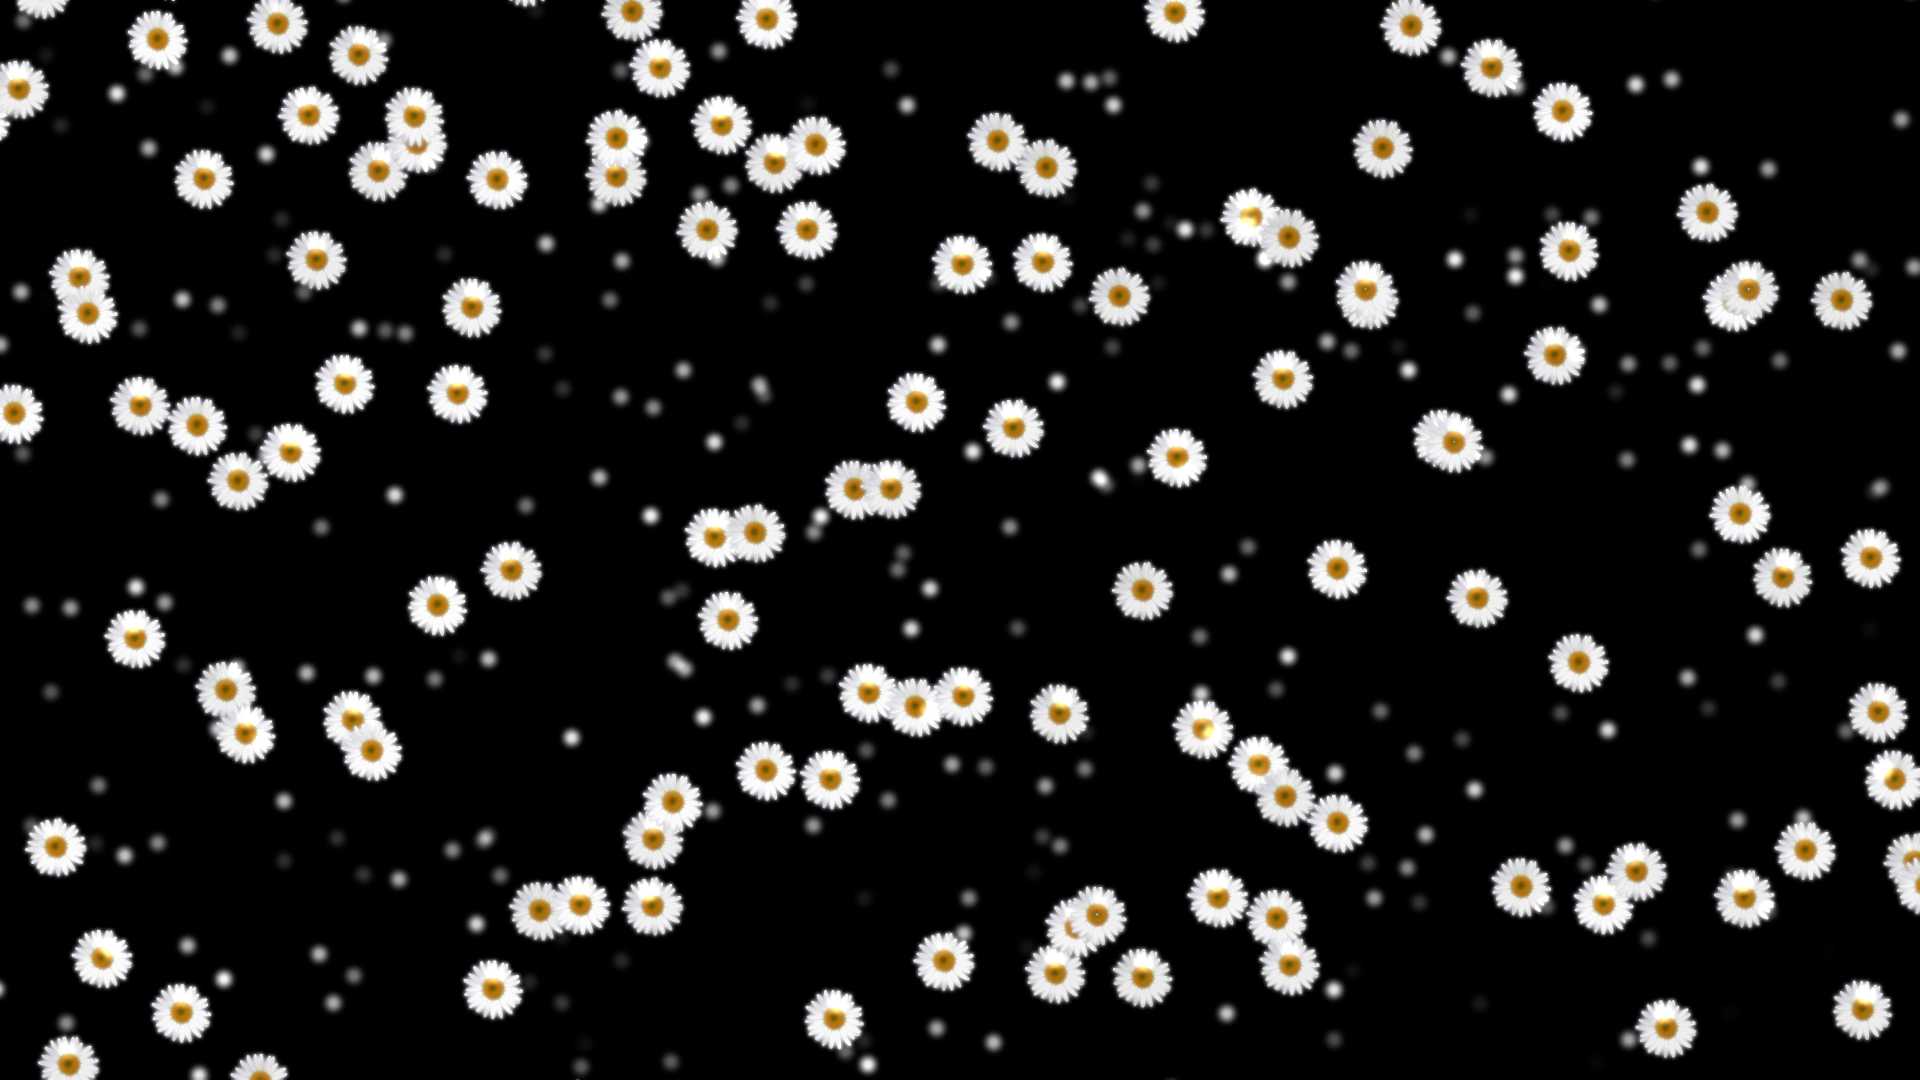 4K Floating Daisy Flowers Overlay Effect Free Download || Overlay Effect For Editing